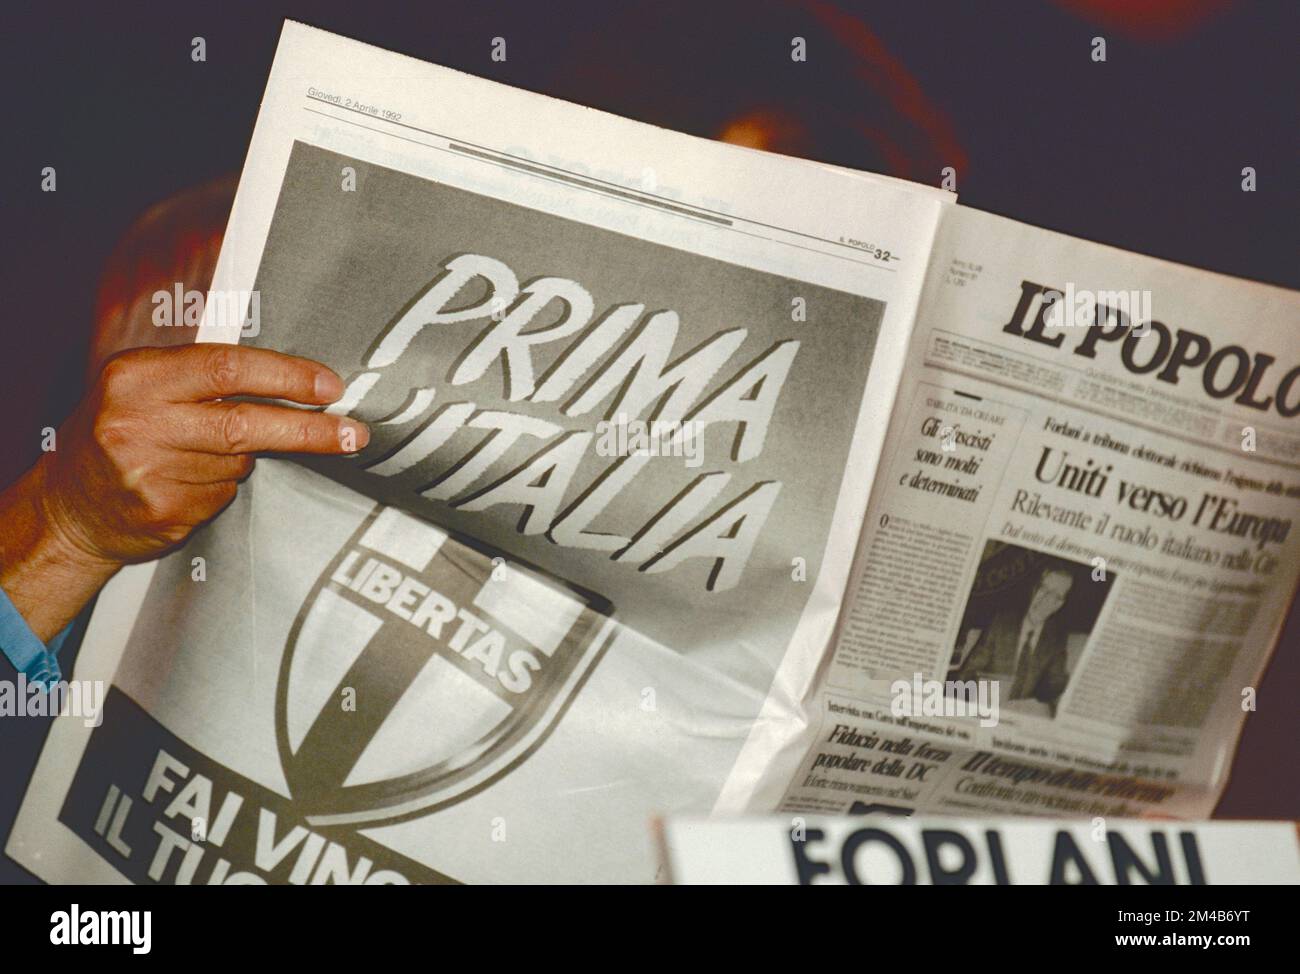 Reading Il Popolo newspaper at the feast of the Christian Democrats party, Rome, Italy 1992 Stock Photo